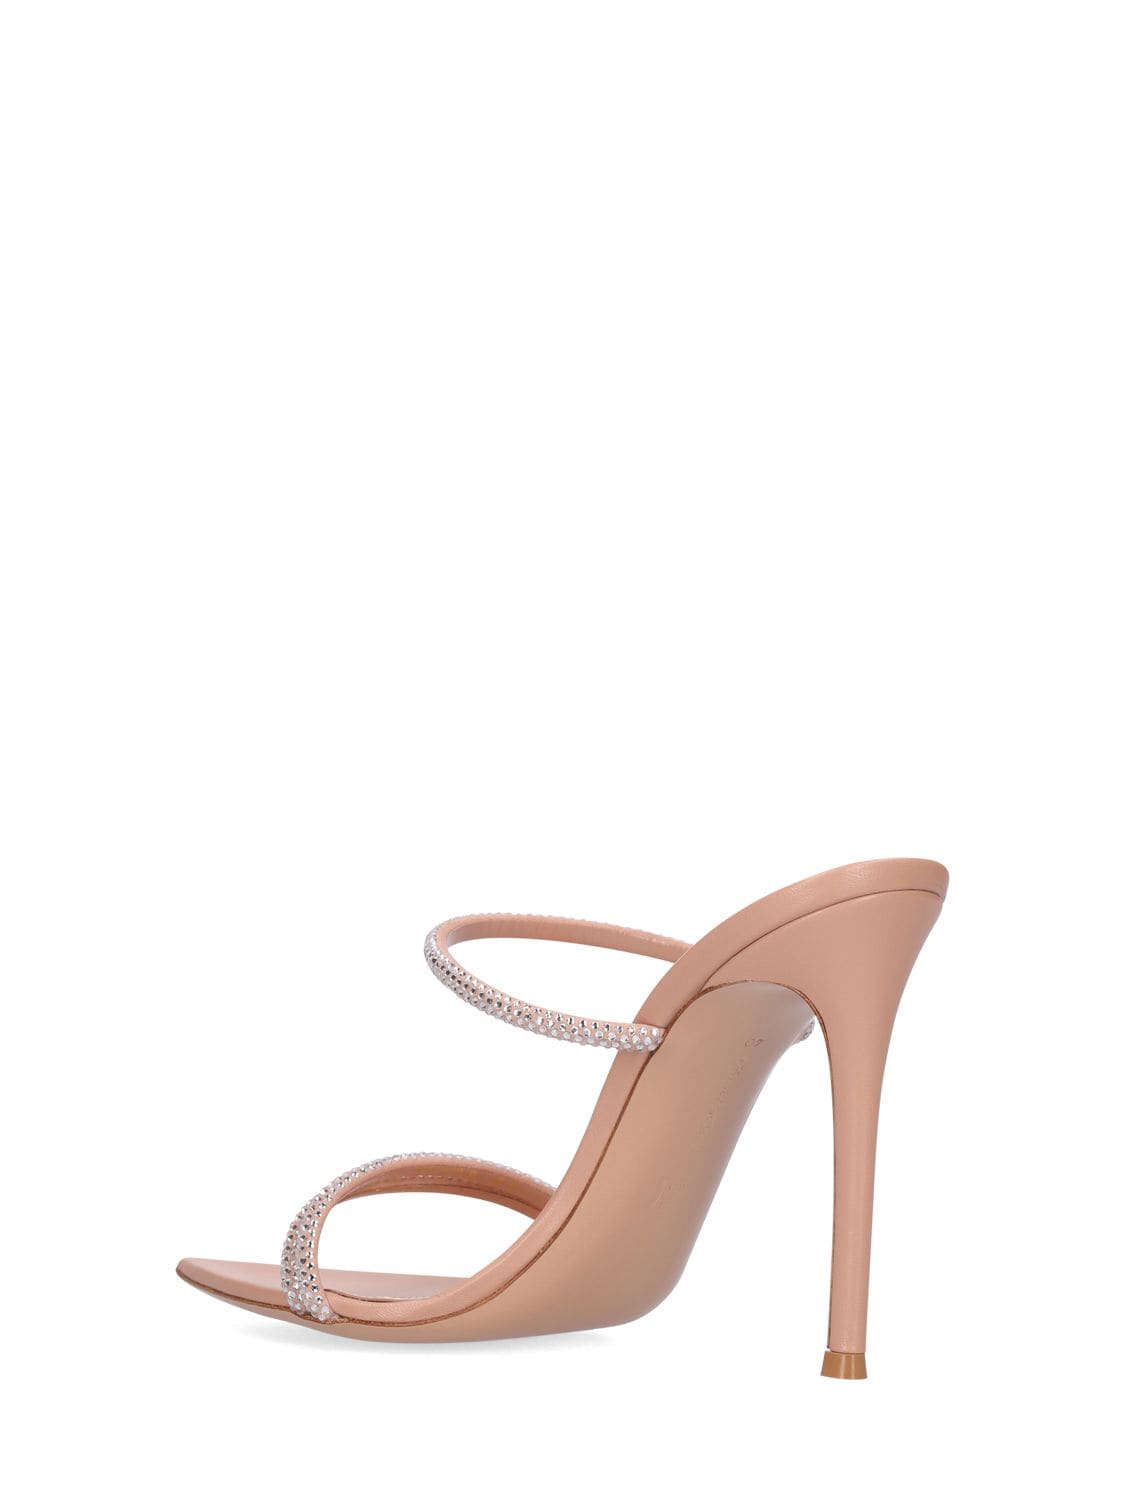 Shop Gianvito Rossi 105mm Cannes Crystal & Leather Sandals In Nude